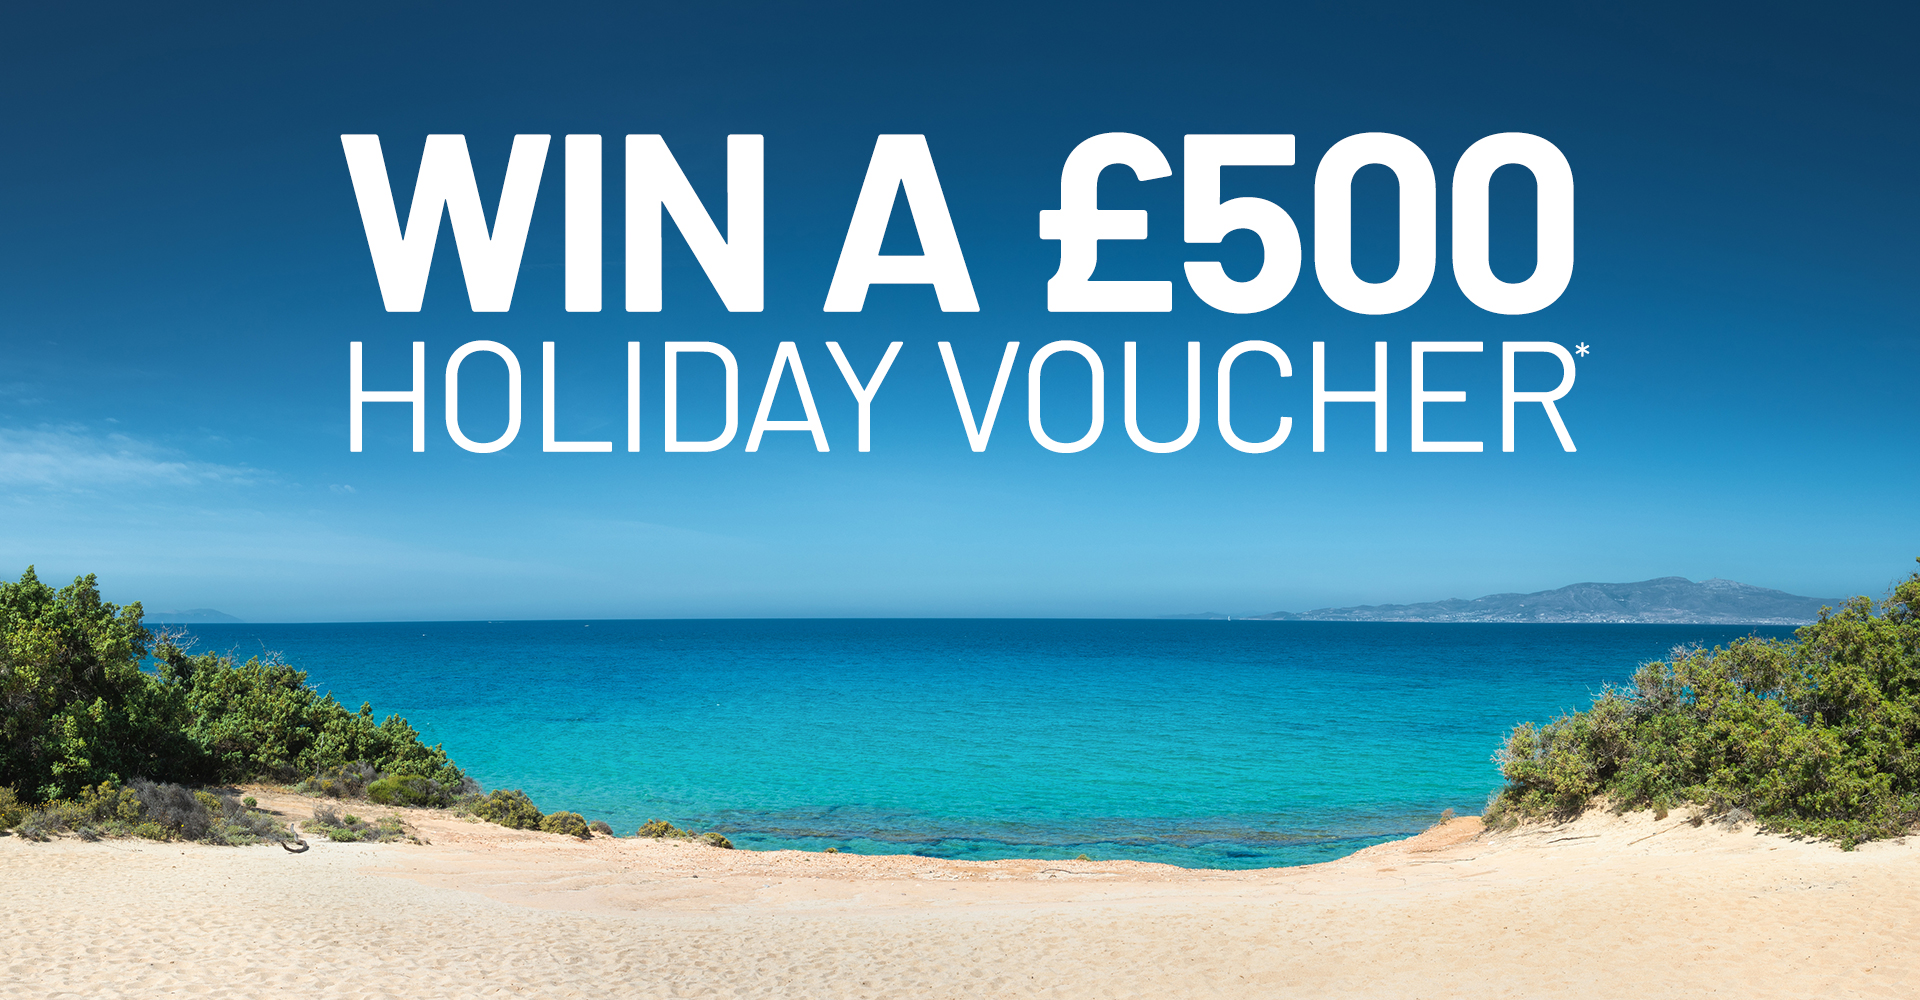 Win A £500 Holiday Voucher